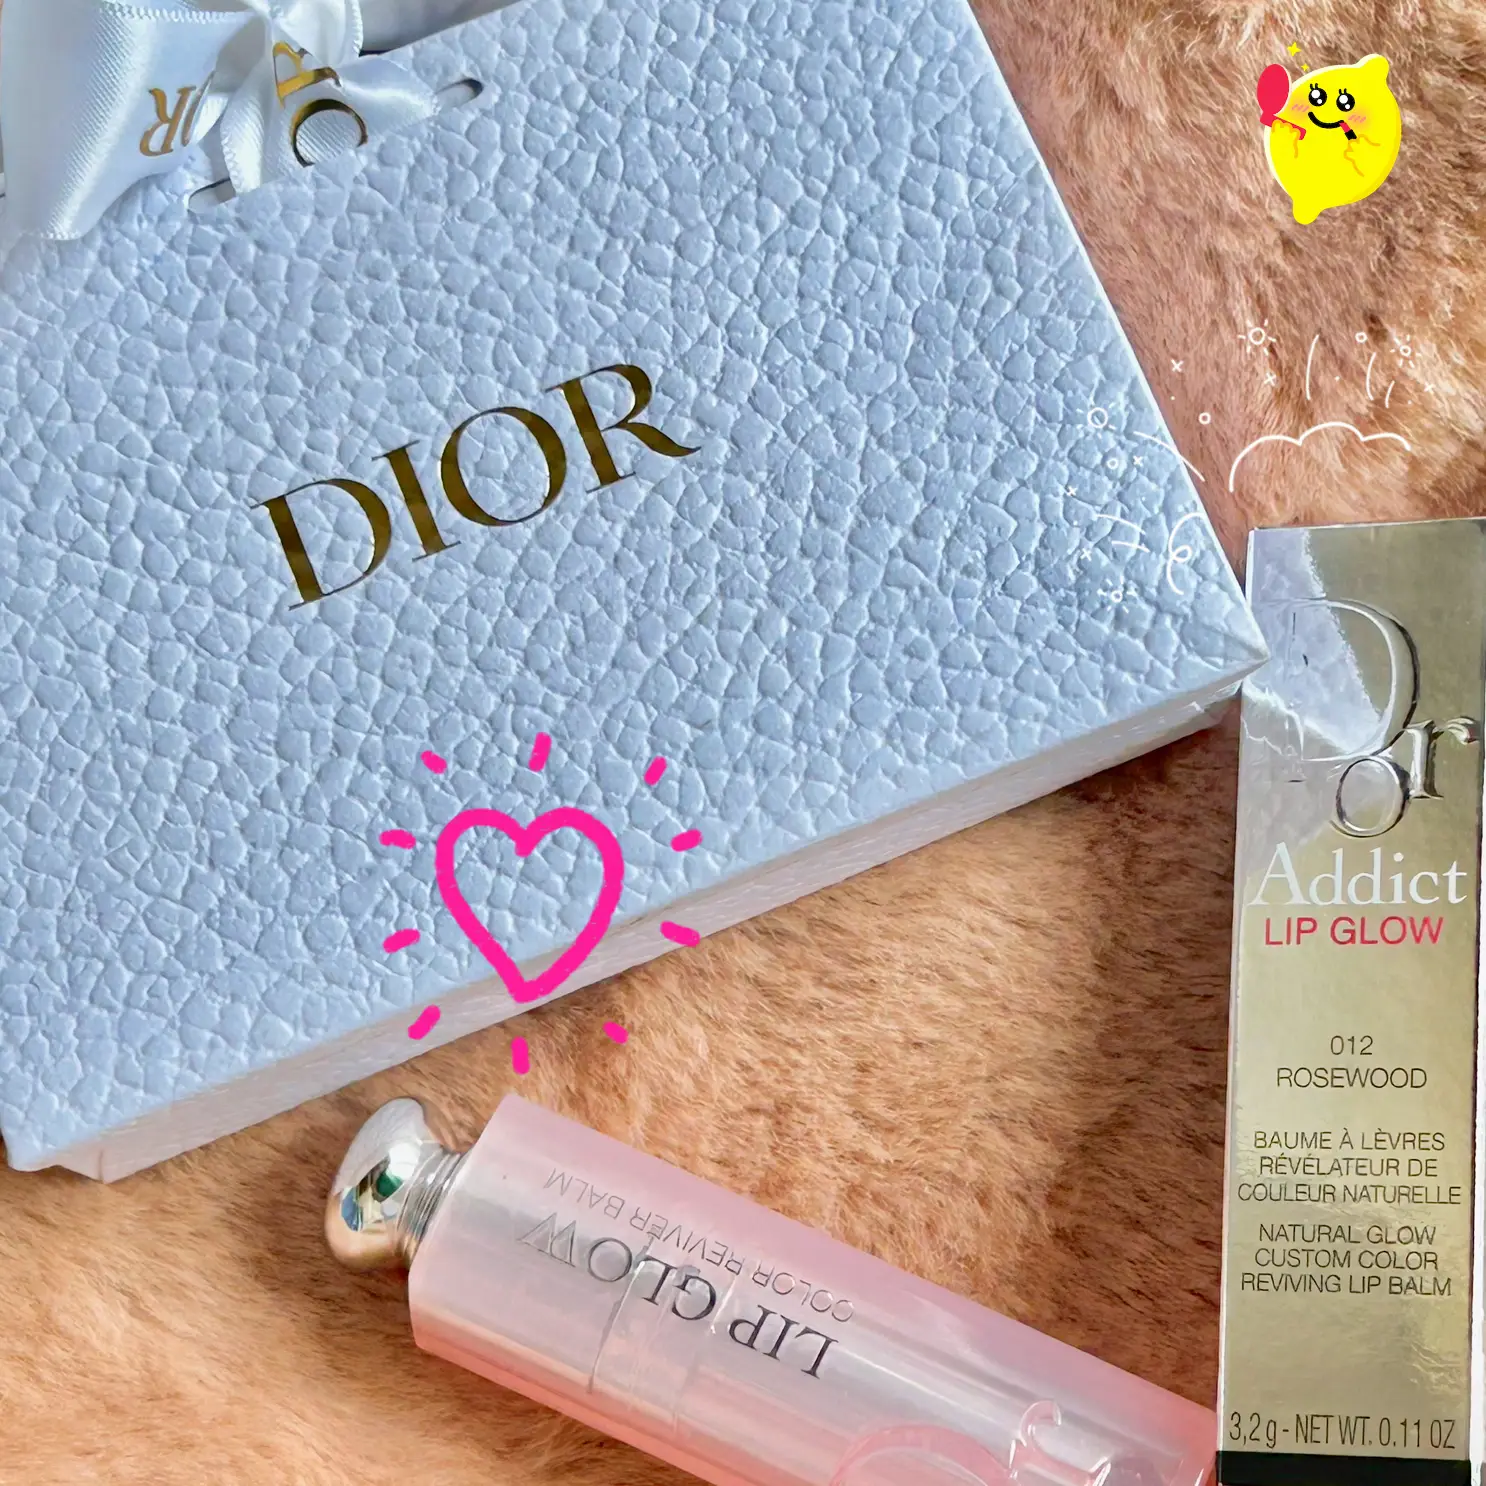 | F Lemon8 posted Lip by | ꕥ Rosewood 012 !! €; 💋Review Dior Gallery ✨ Glow